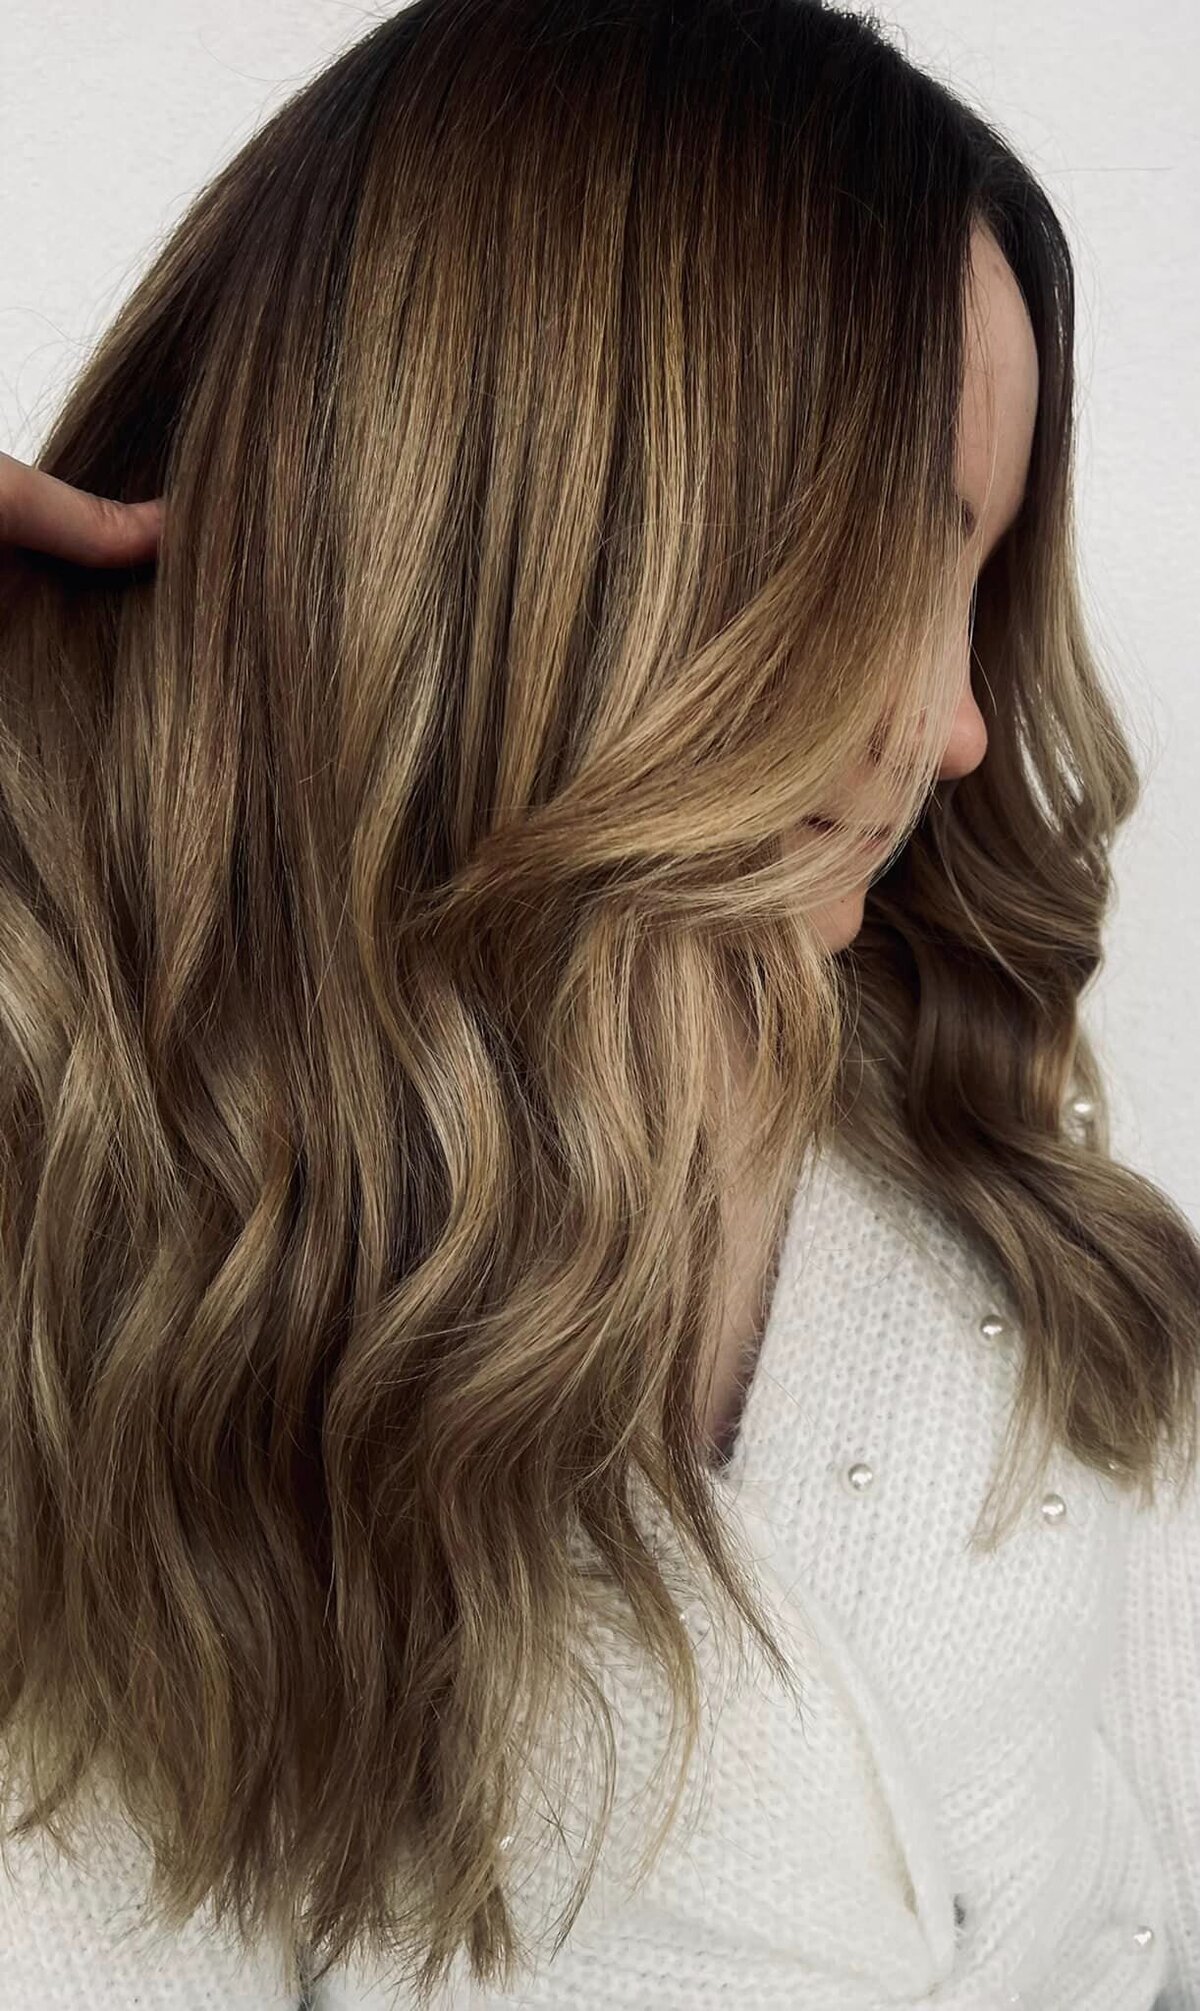 Experience the allure of brunette hair. Transform your look with rich, dimensional color and timeless elegance.